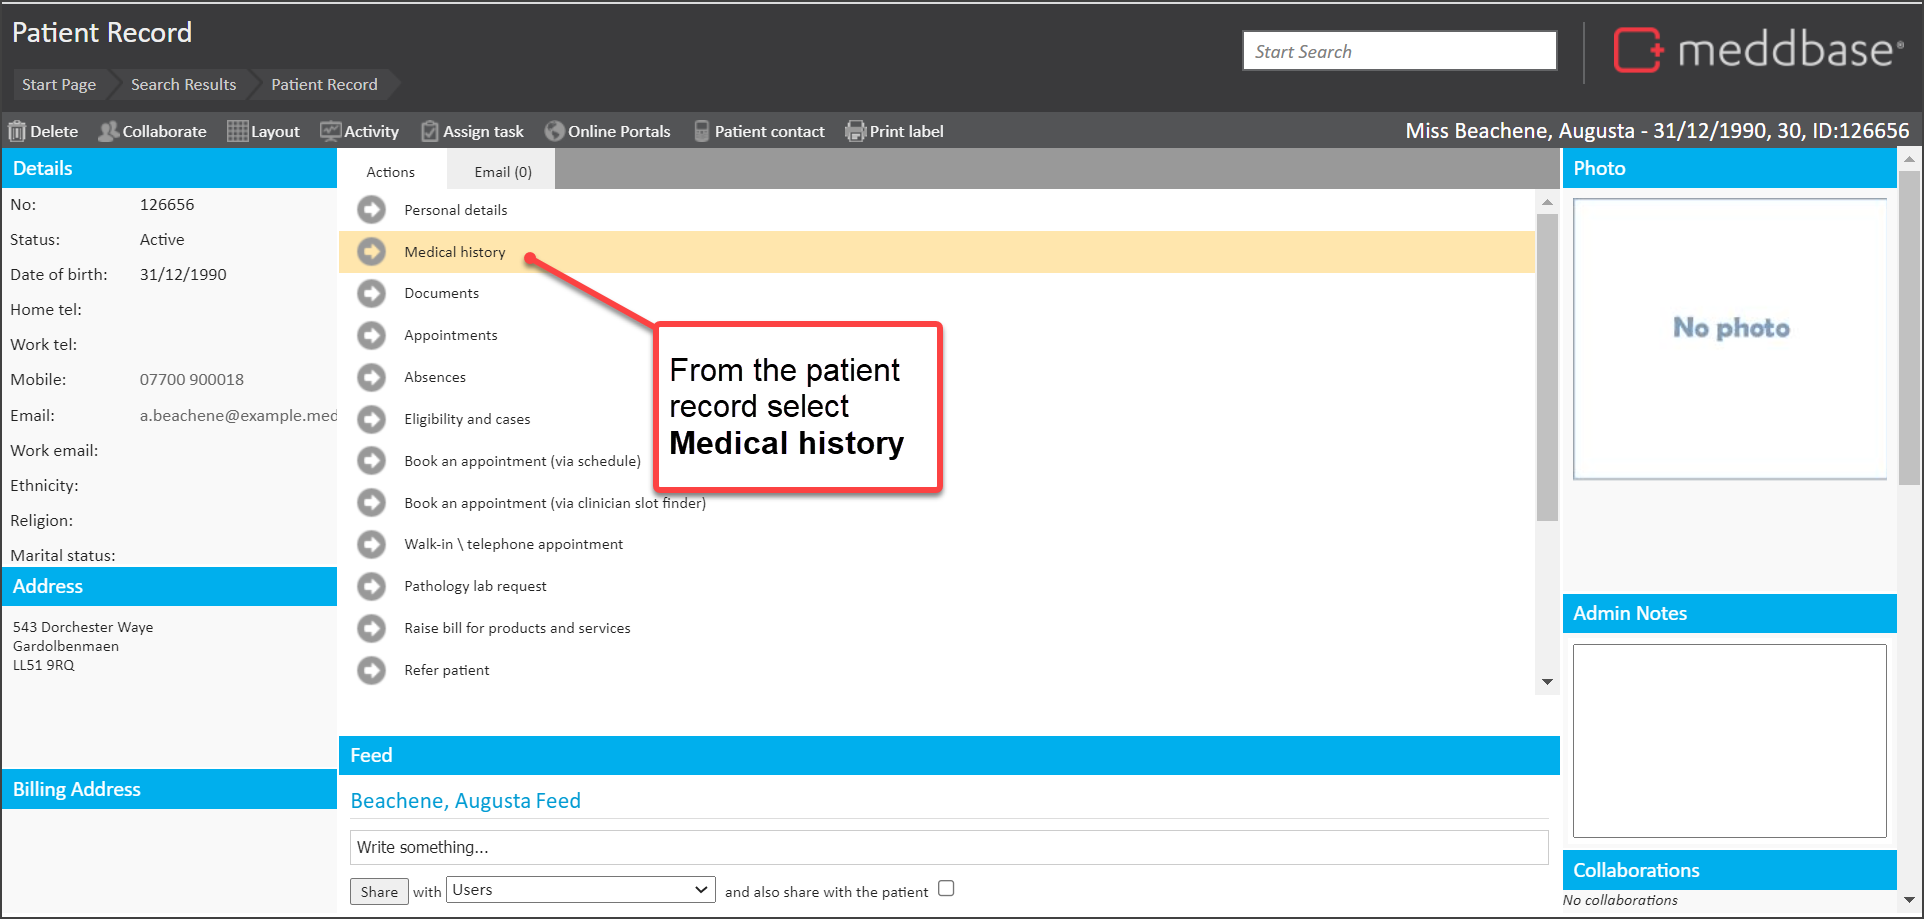 1a_-_Acccess_Medical_History_from_patient_record.png